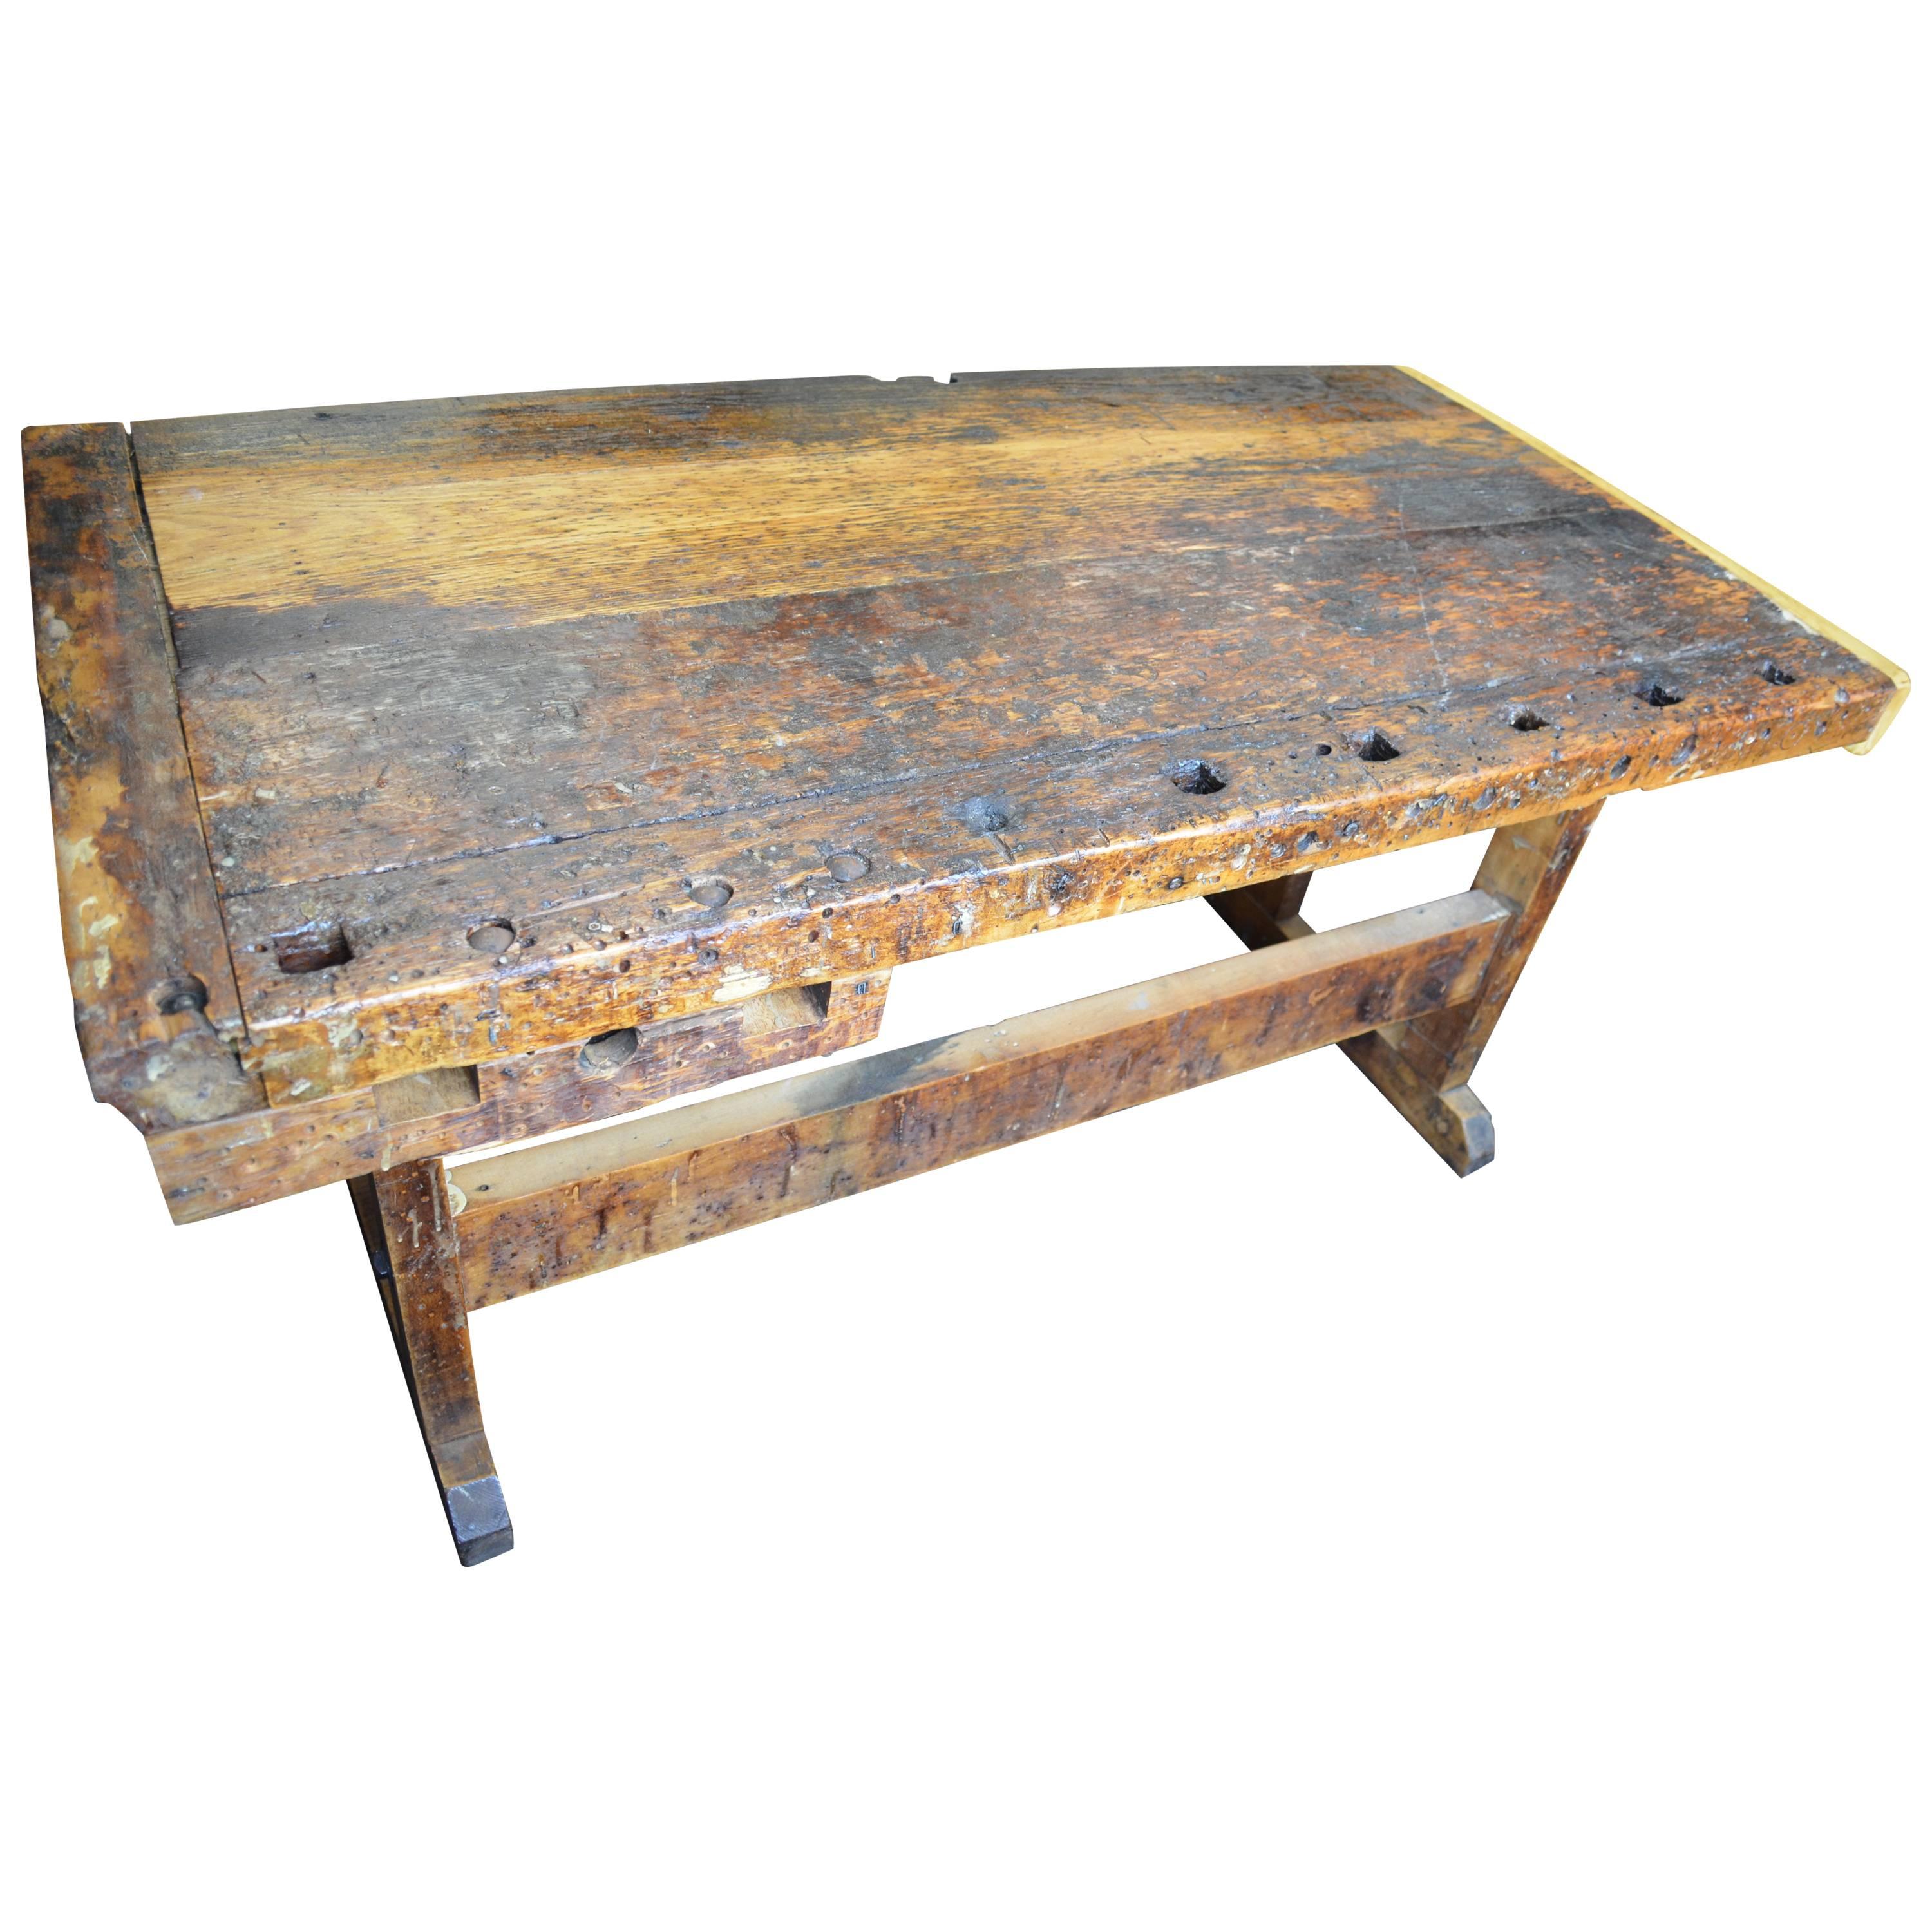 Primitive Wooden Workbench, Late 1800s